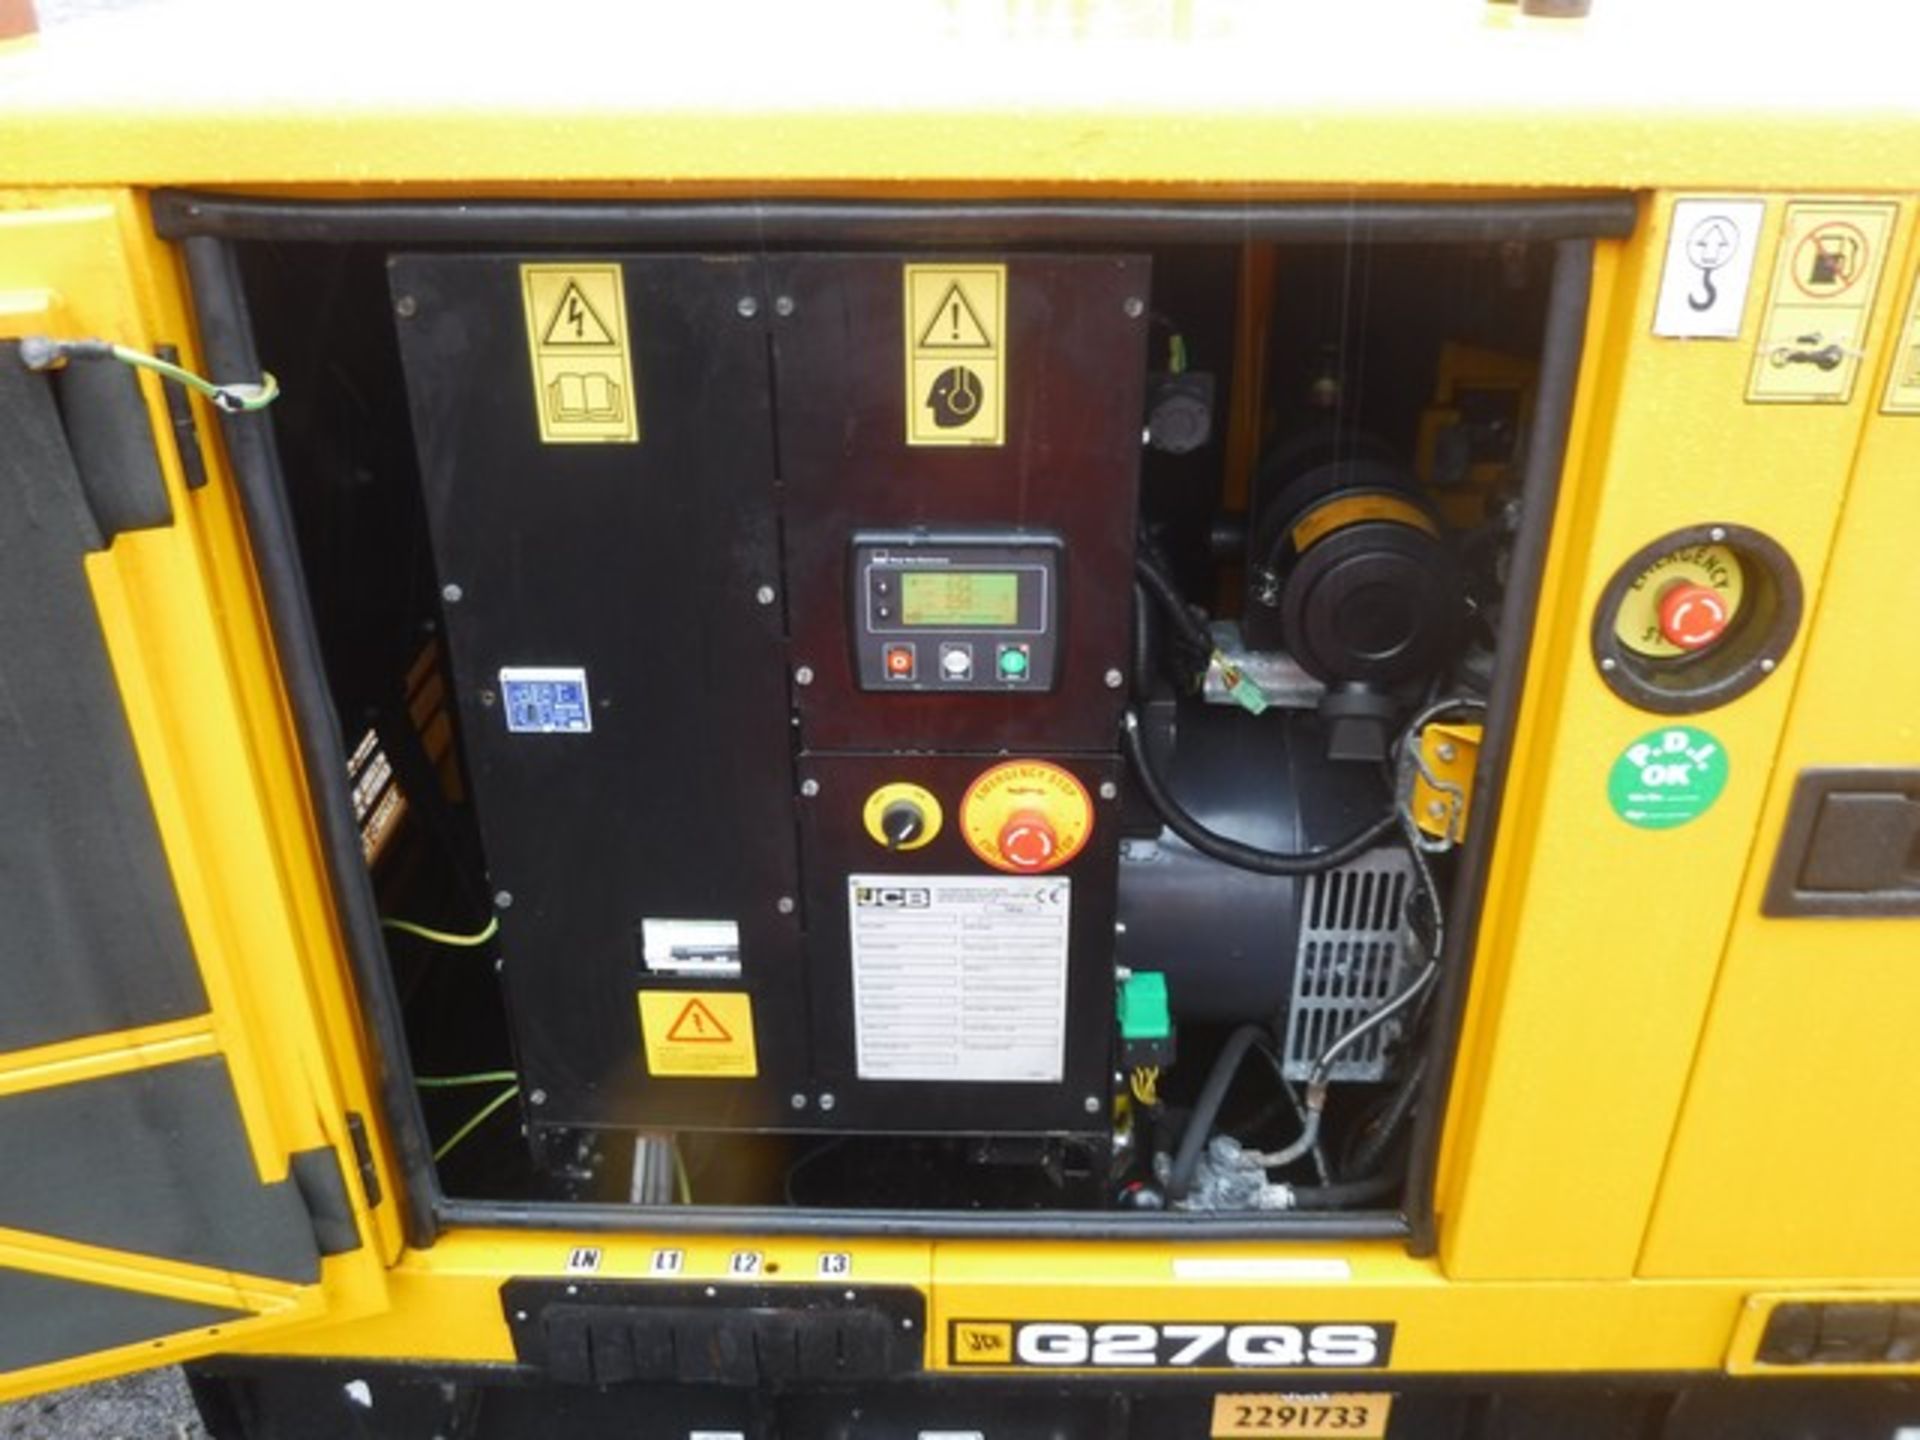 2017 JCB G27QS generator 24.5KVA rate power engine no 4701300610 1081hrs (not verified) - Image 9 of 11